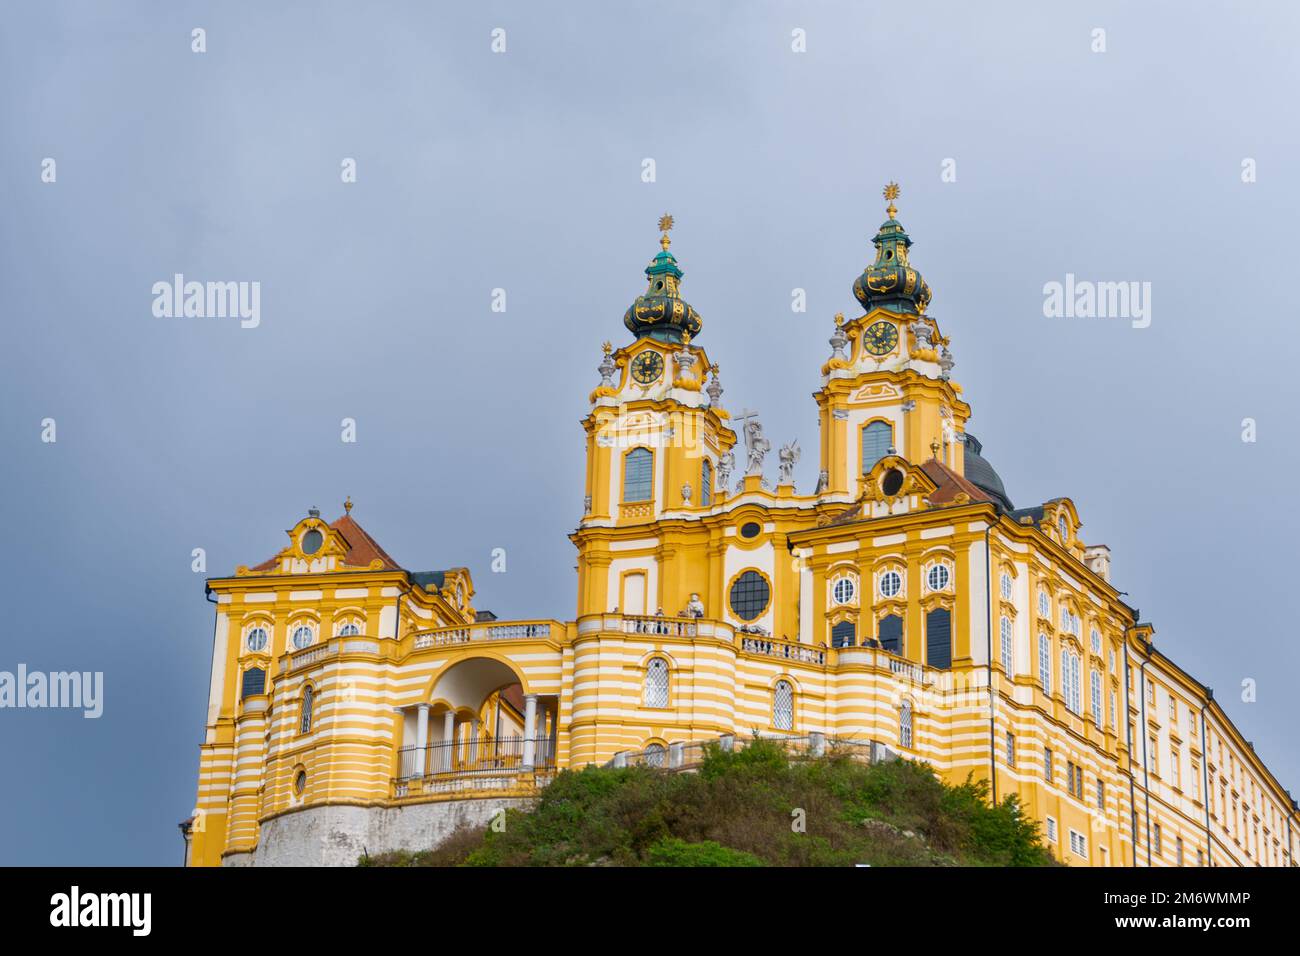 The historic Melk Abbey and church spires on the rocky promontory above the Danube River Stock Photo